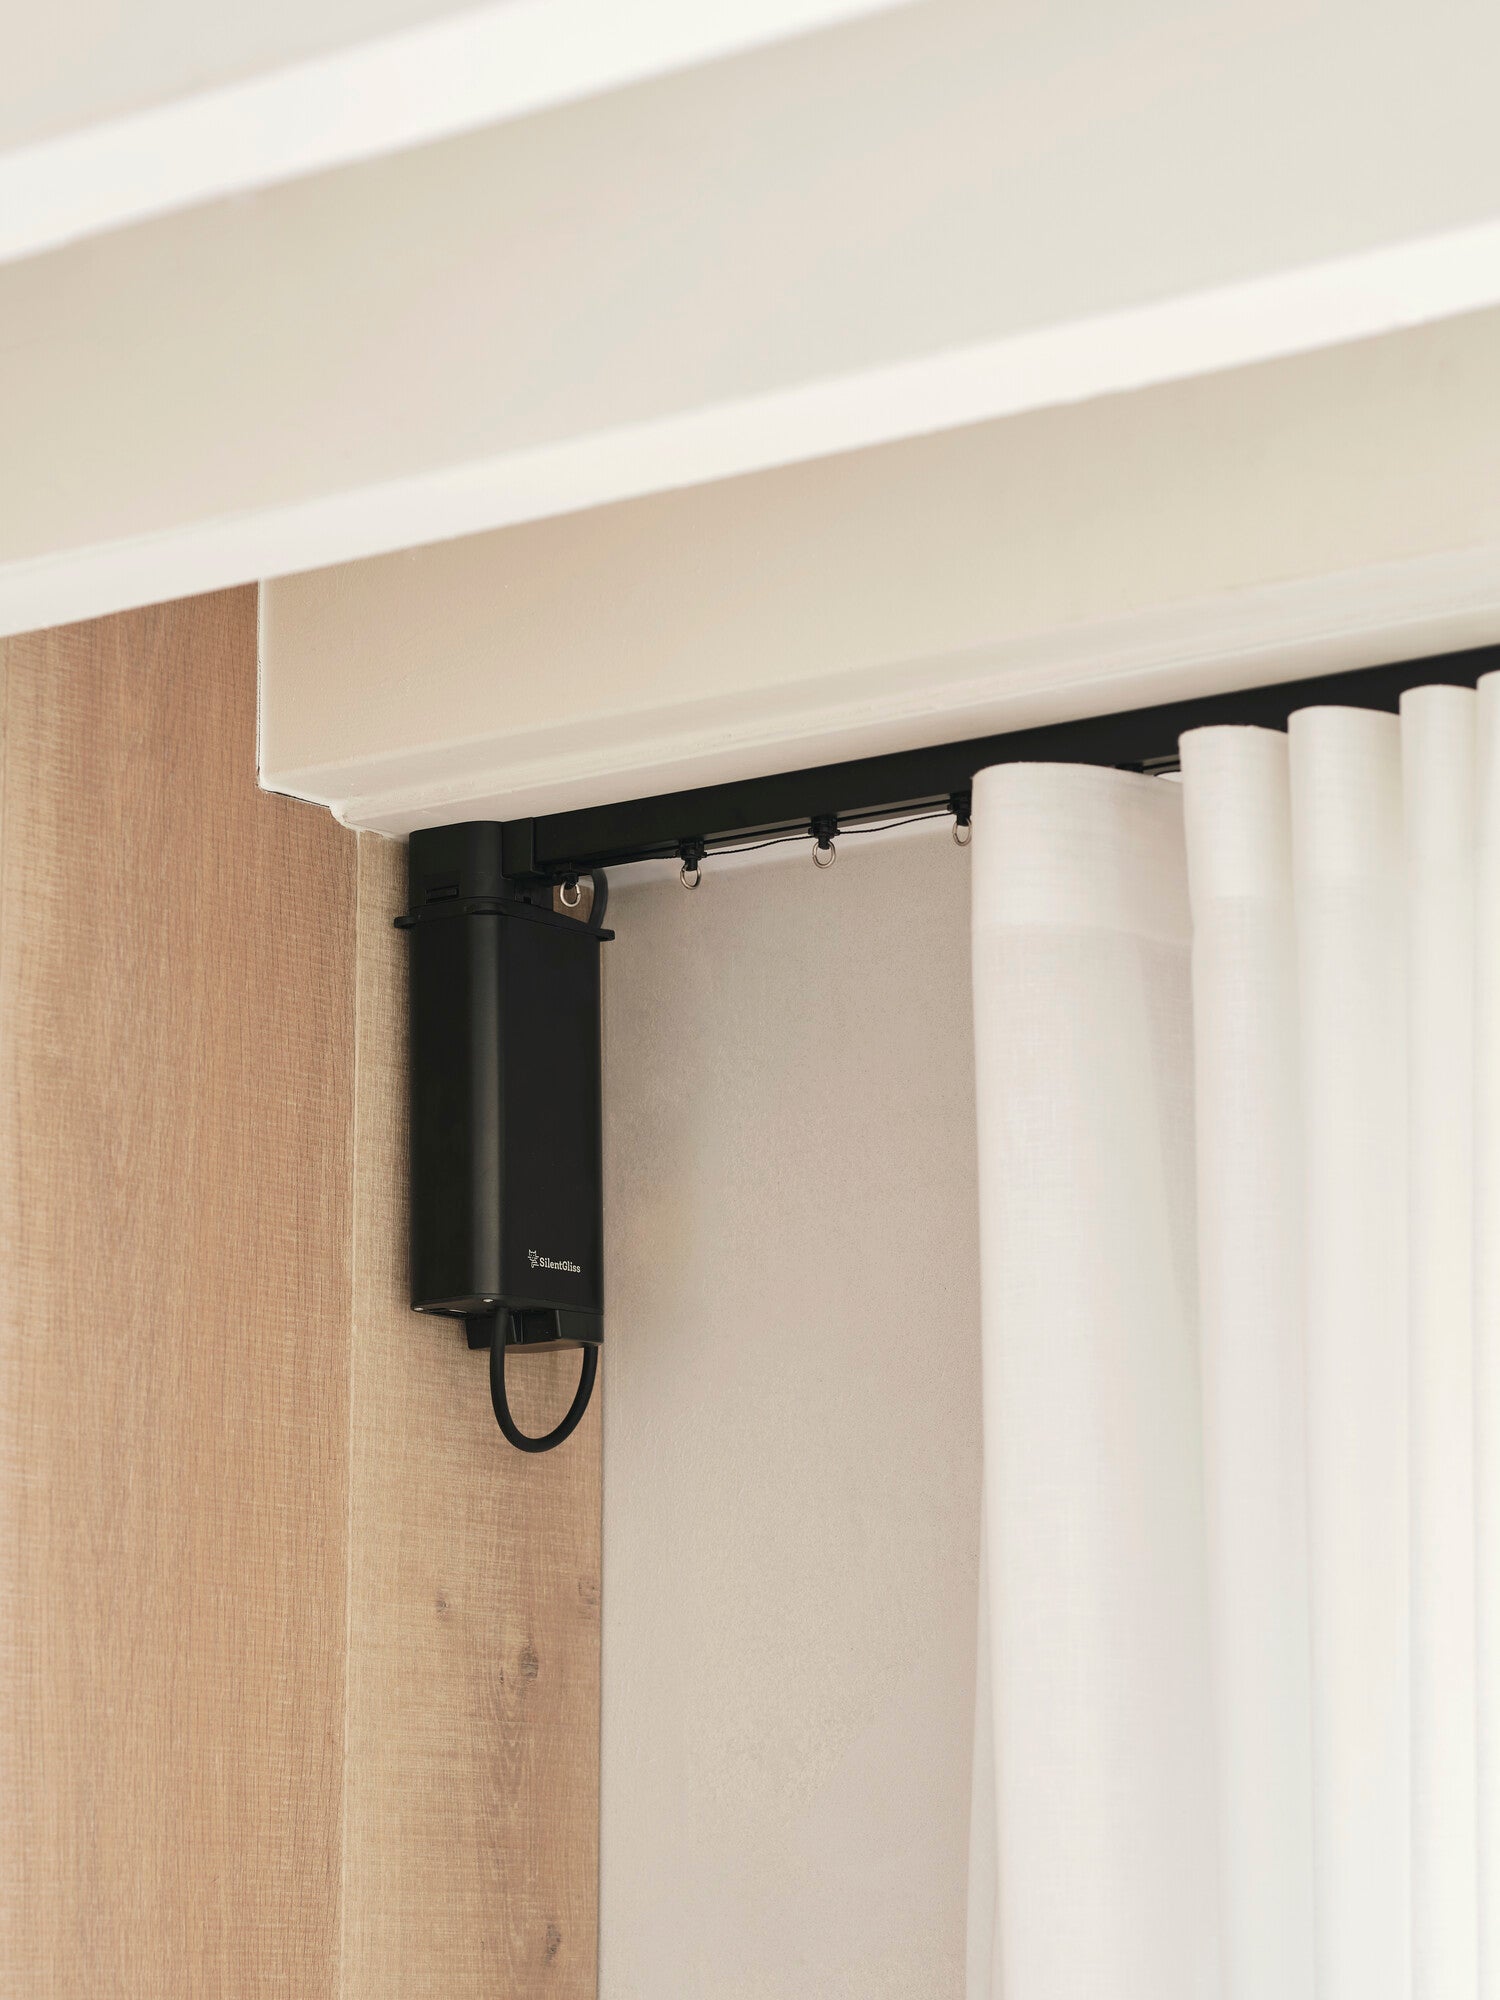 Silent Gliss 5600 Electric Curtain Track in Black with Radio Module